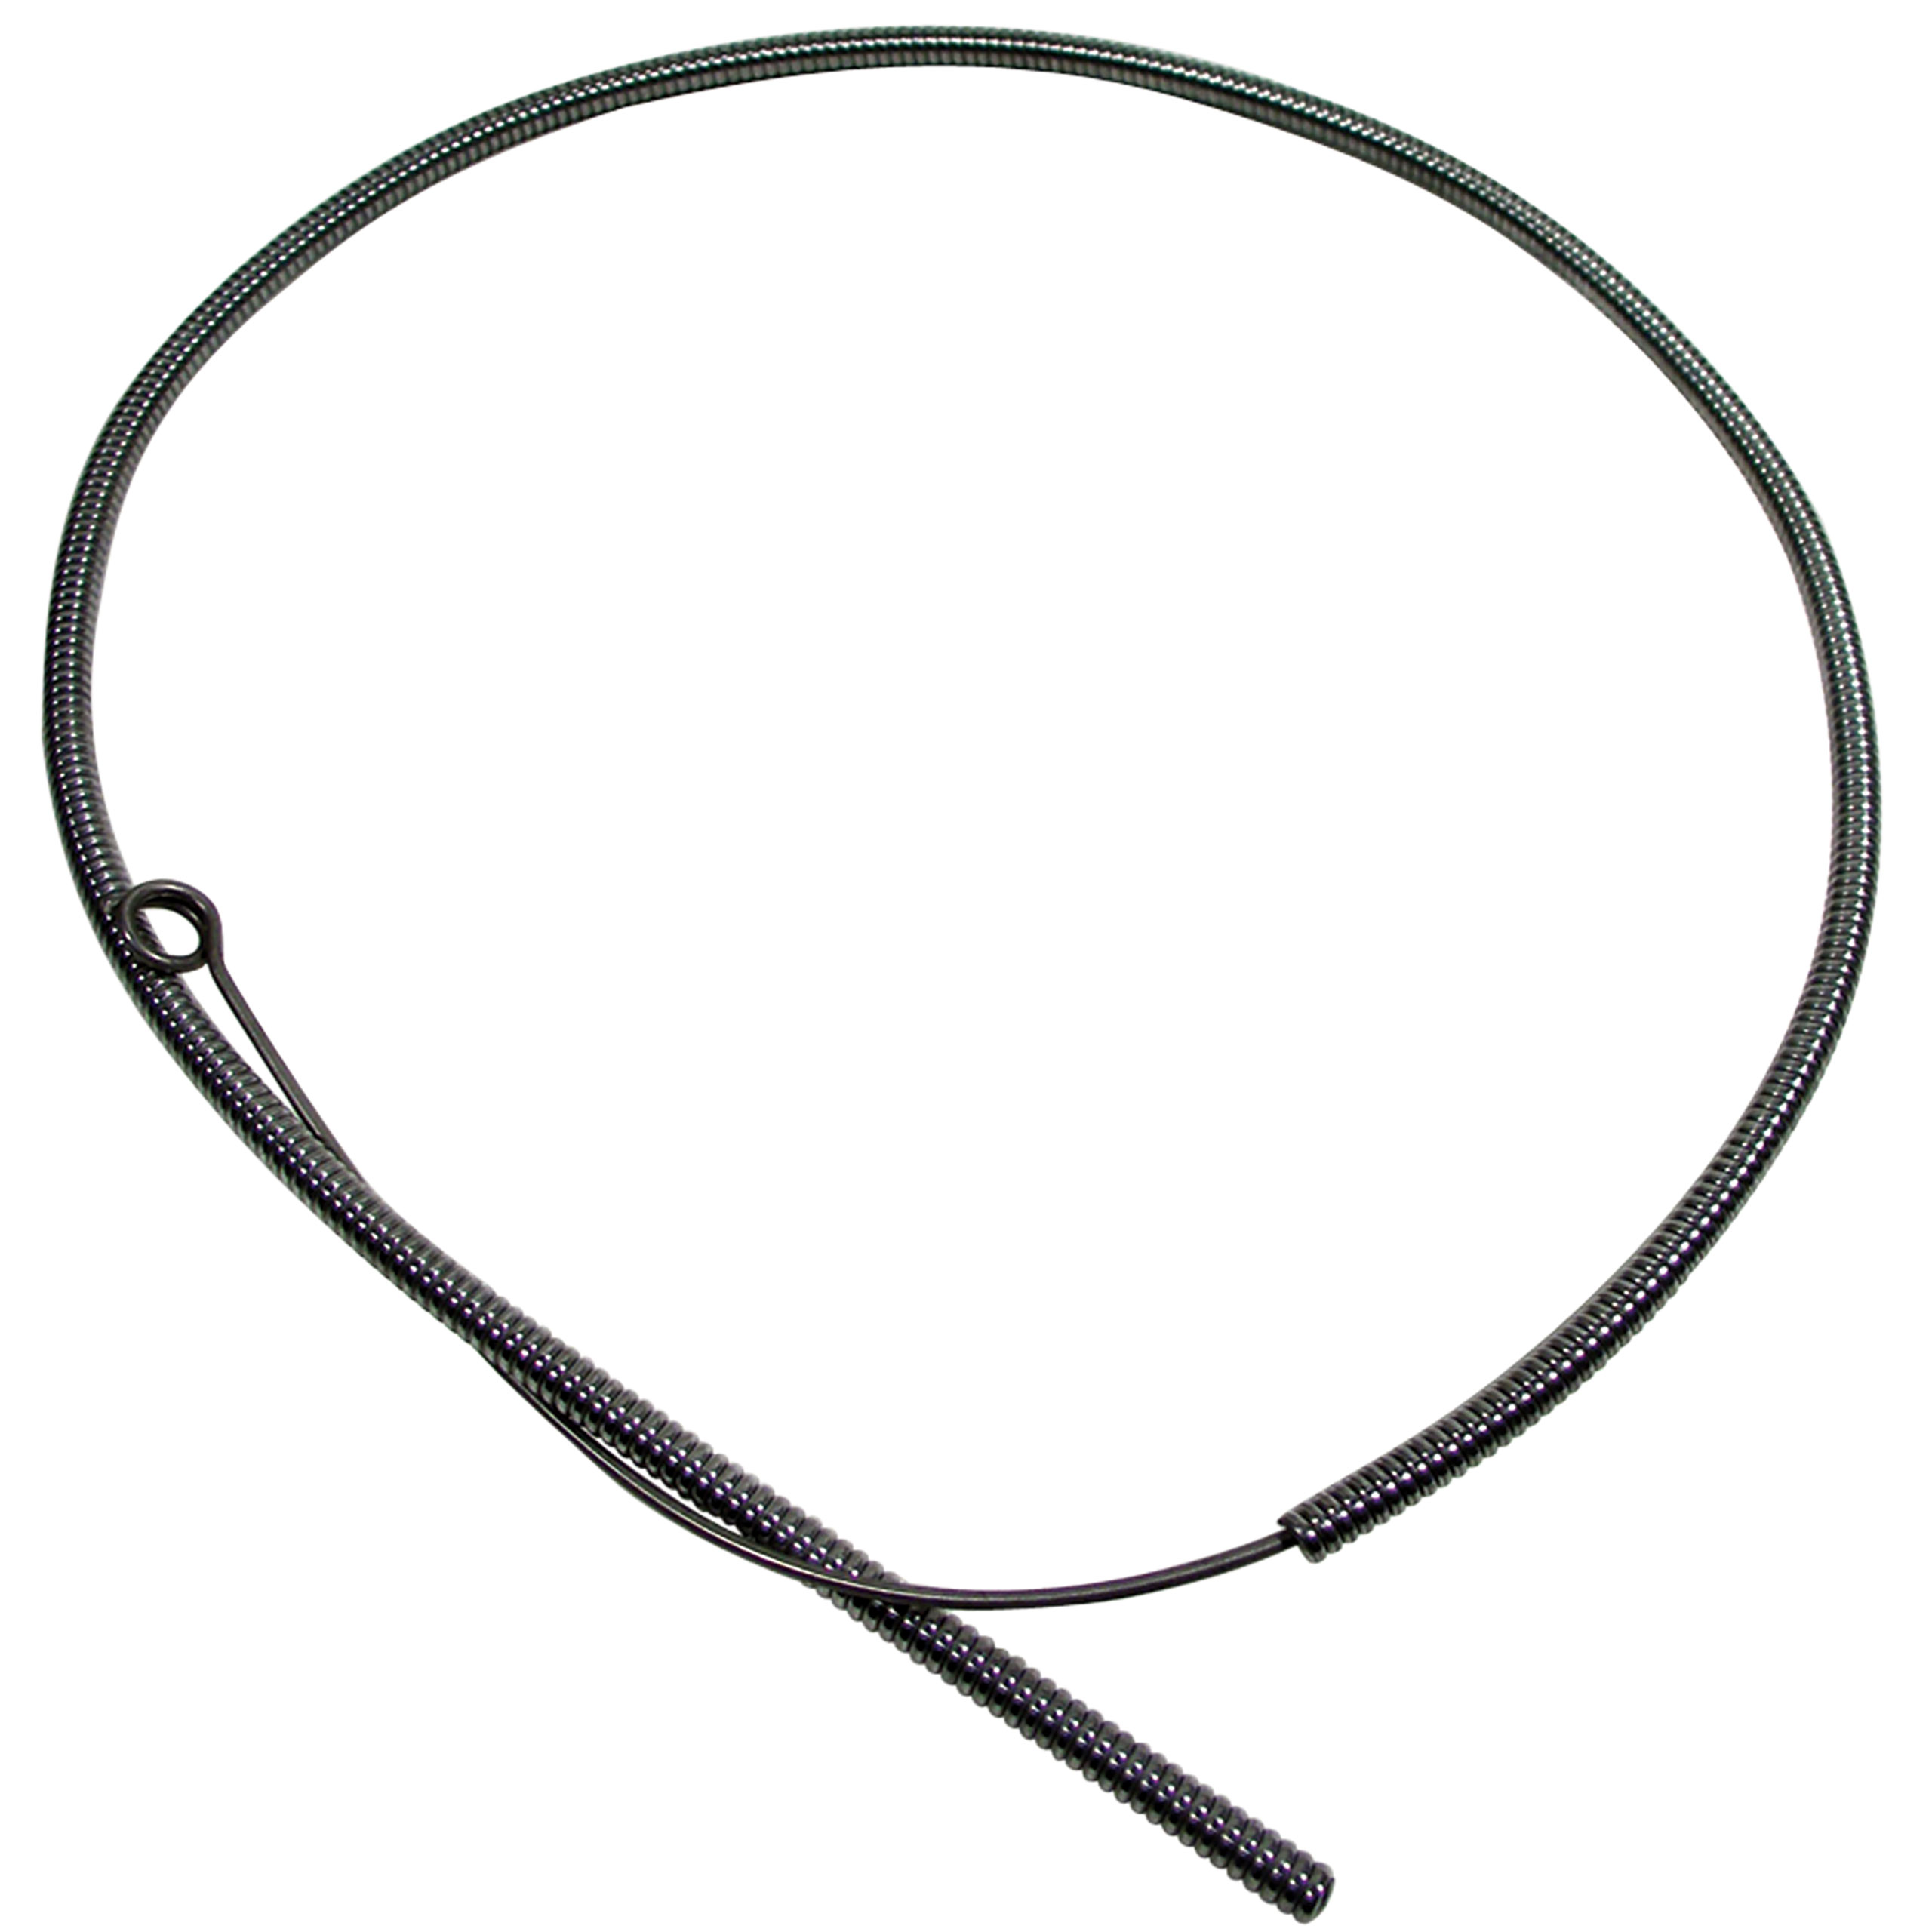 C2 1963-1967 Chevrolet Corvette Decklid Latch Release Cable. 2 Required - Auto Accessories of America